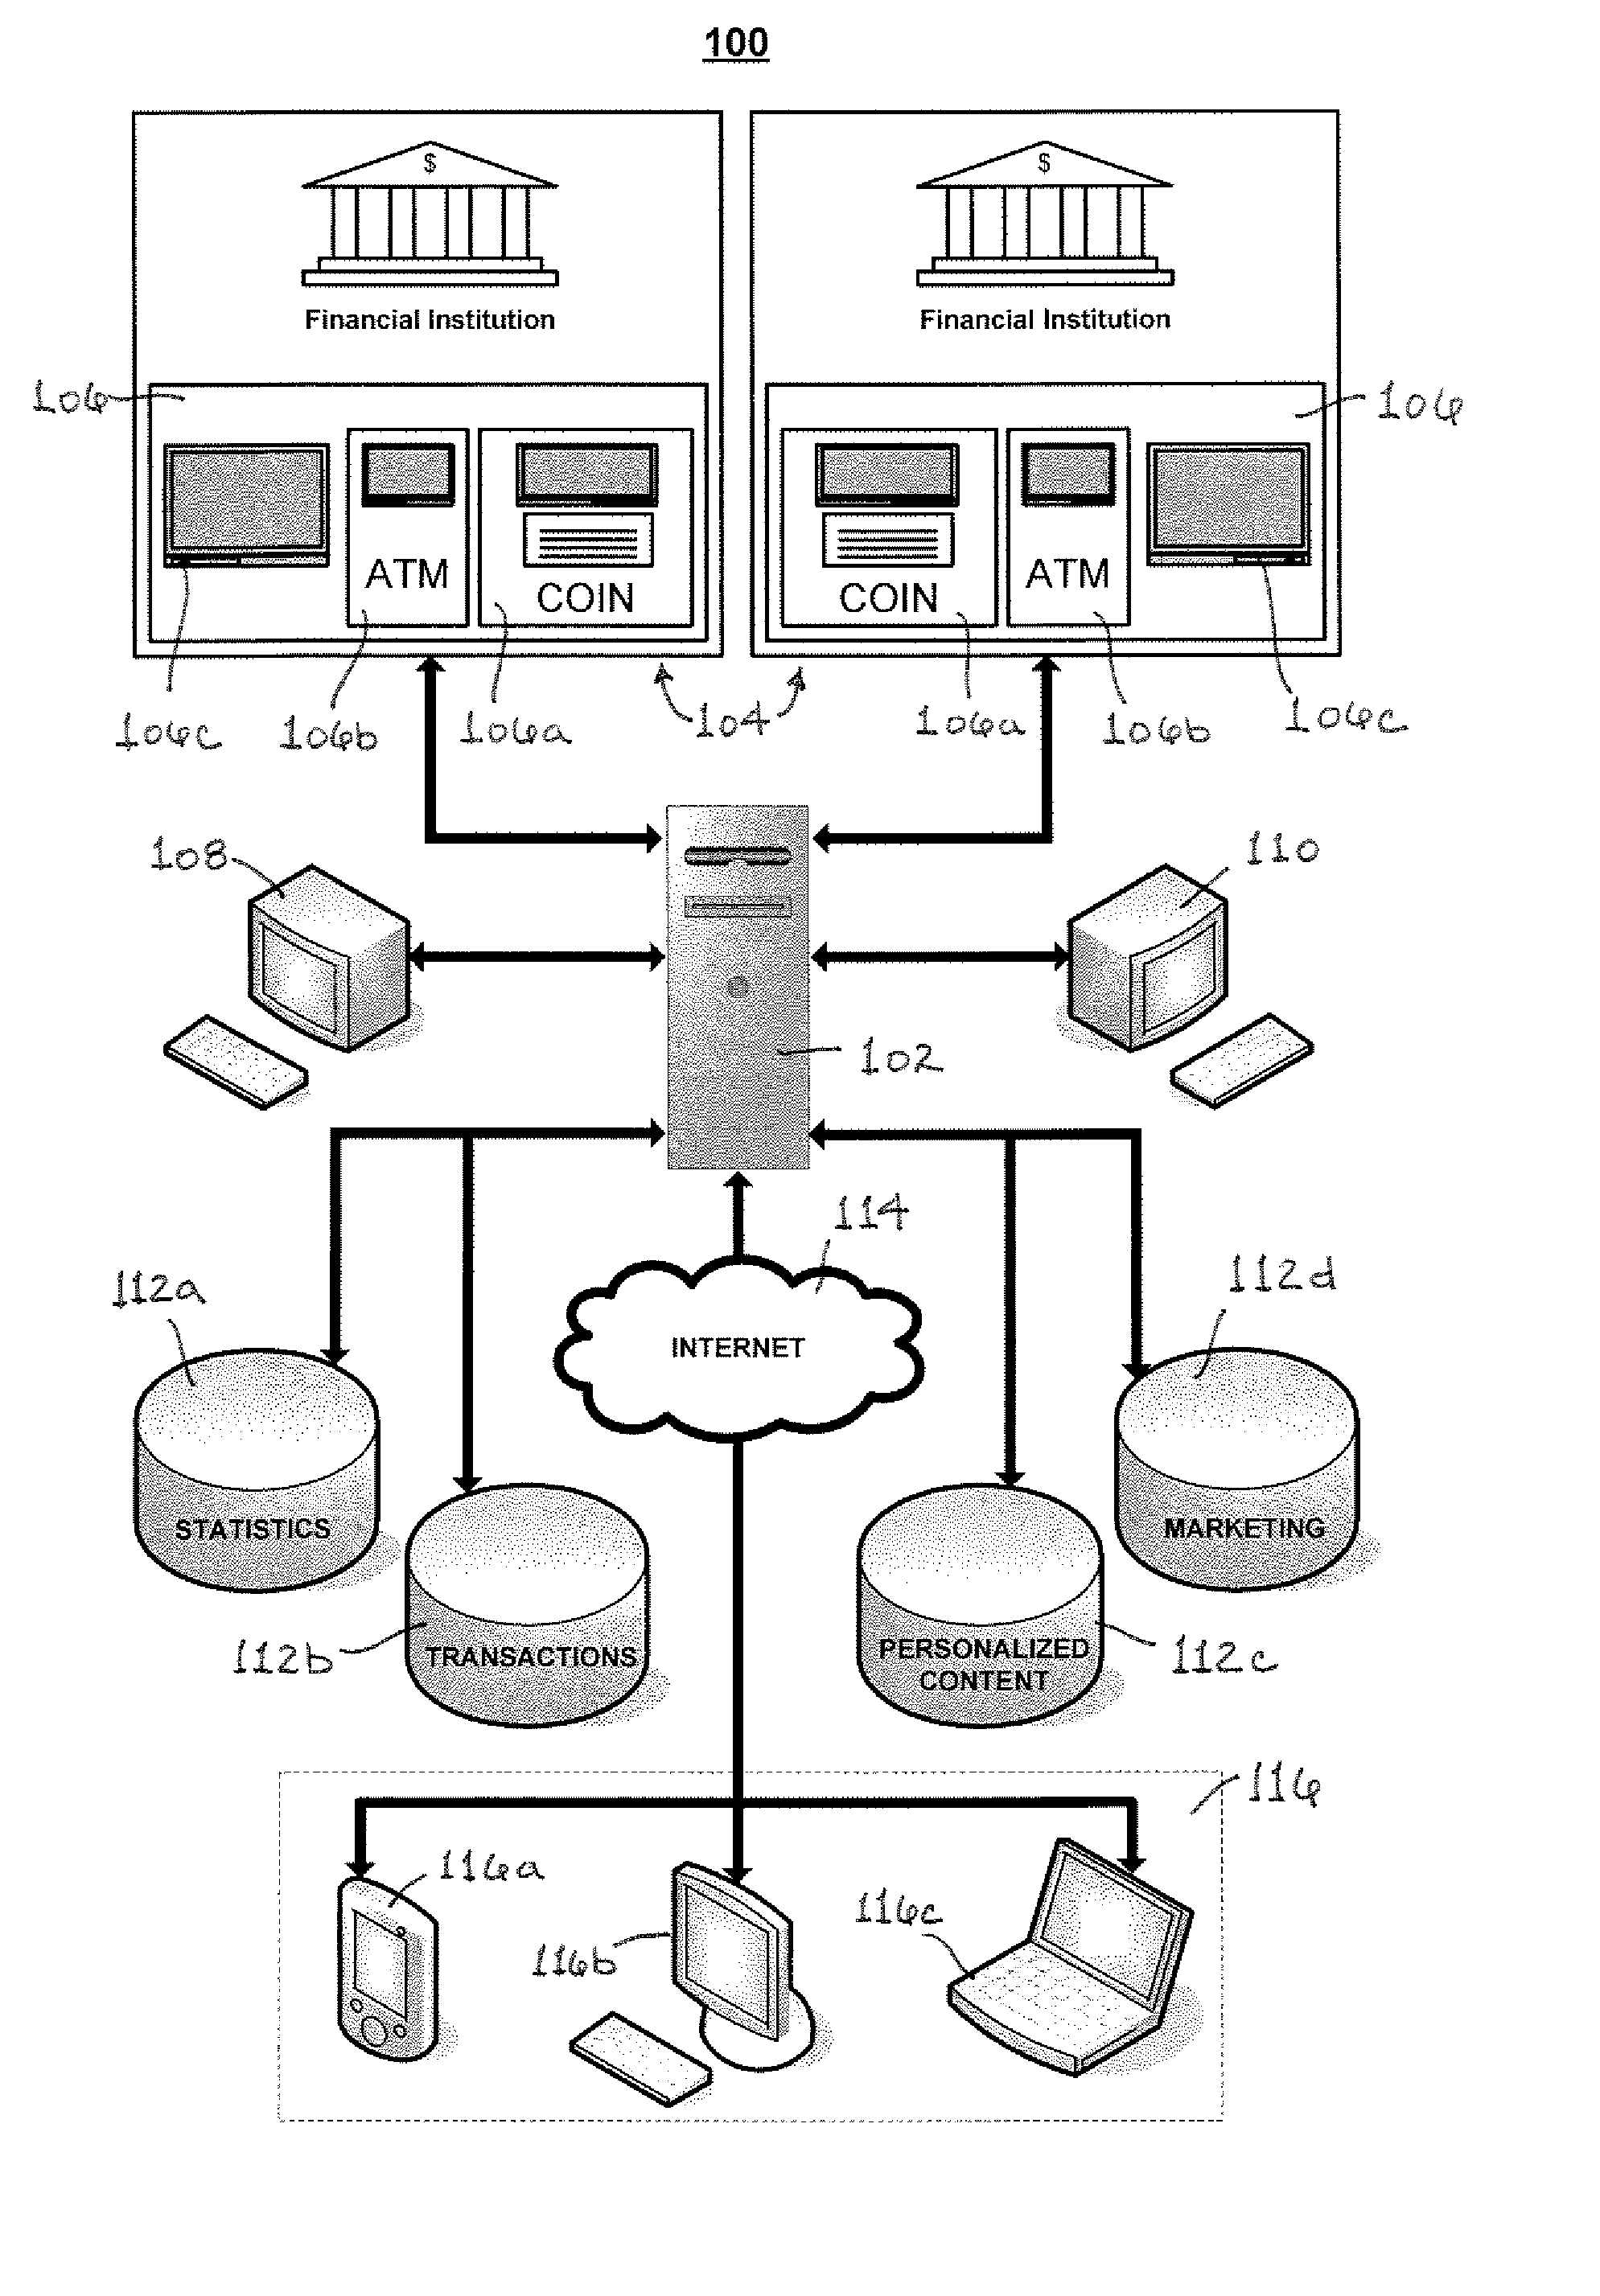 System and method for unifying e-banking touch points and providing personalized financial services